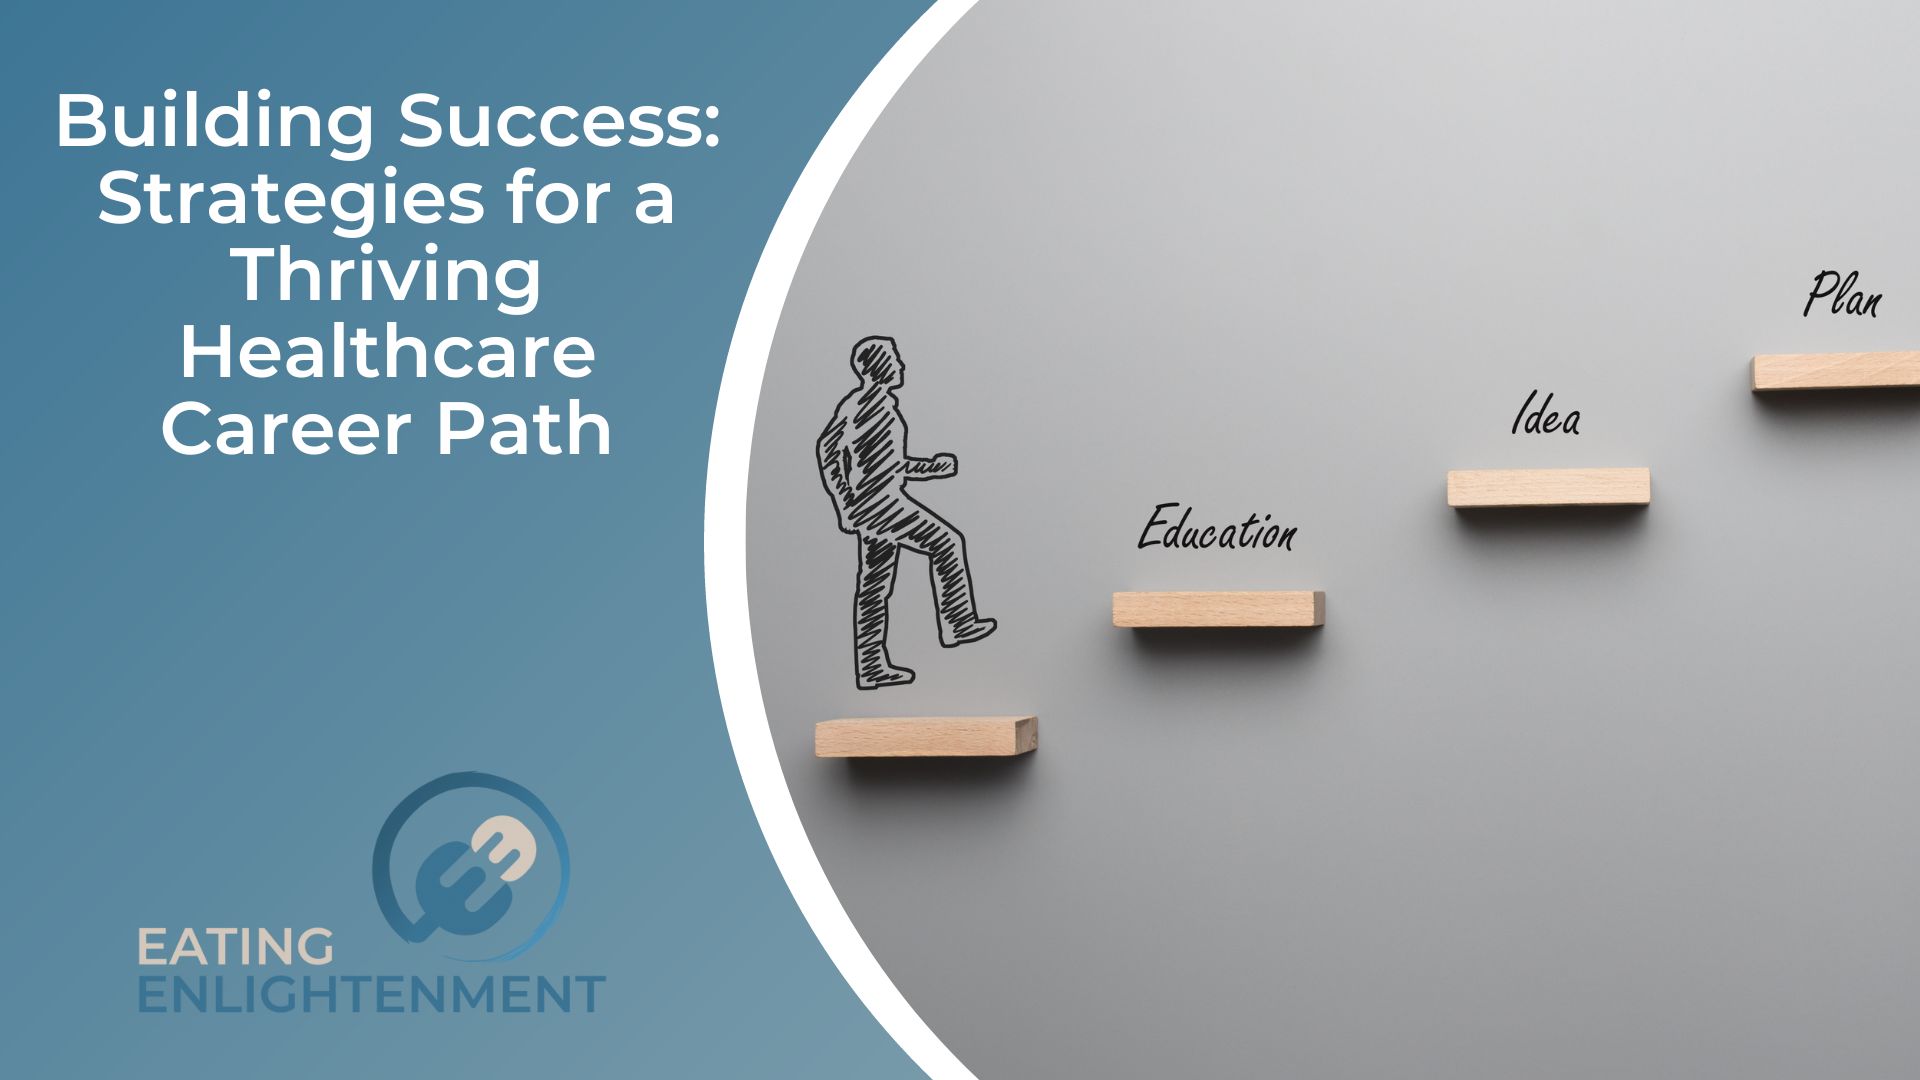 Building Success Strategies for a Thriving Healthcare Career Path